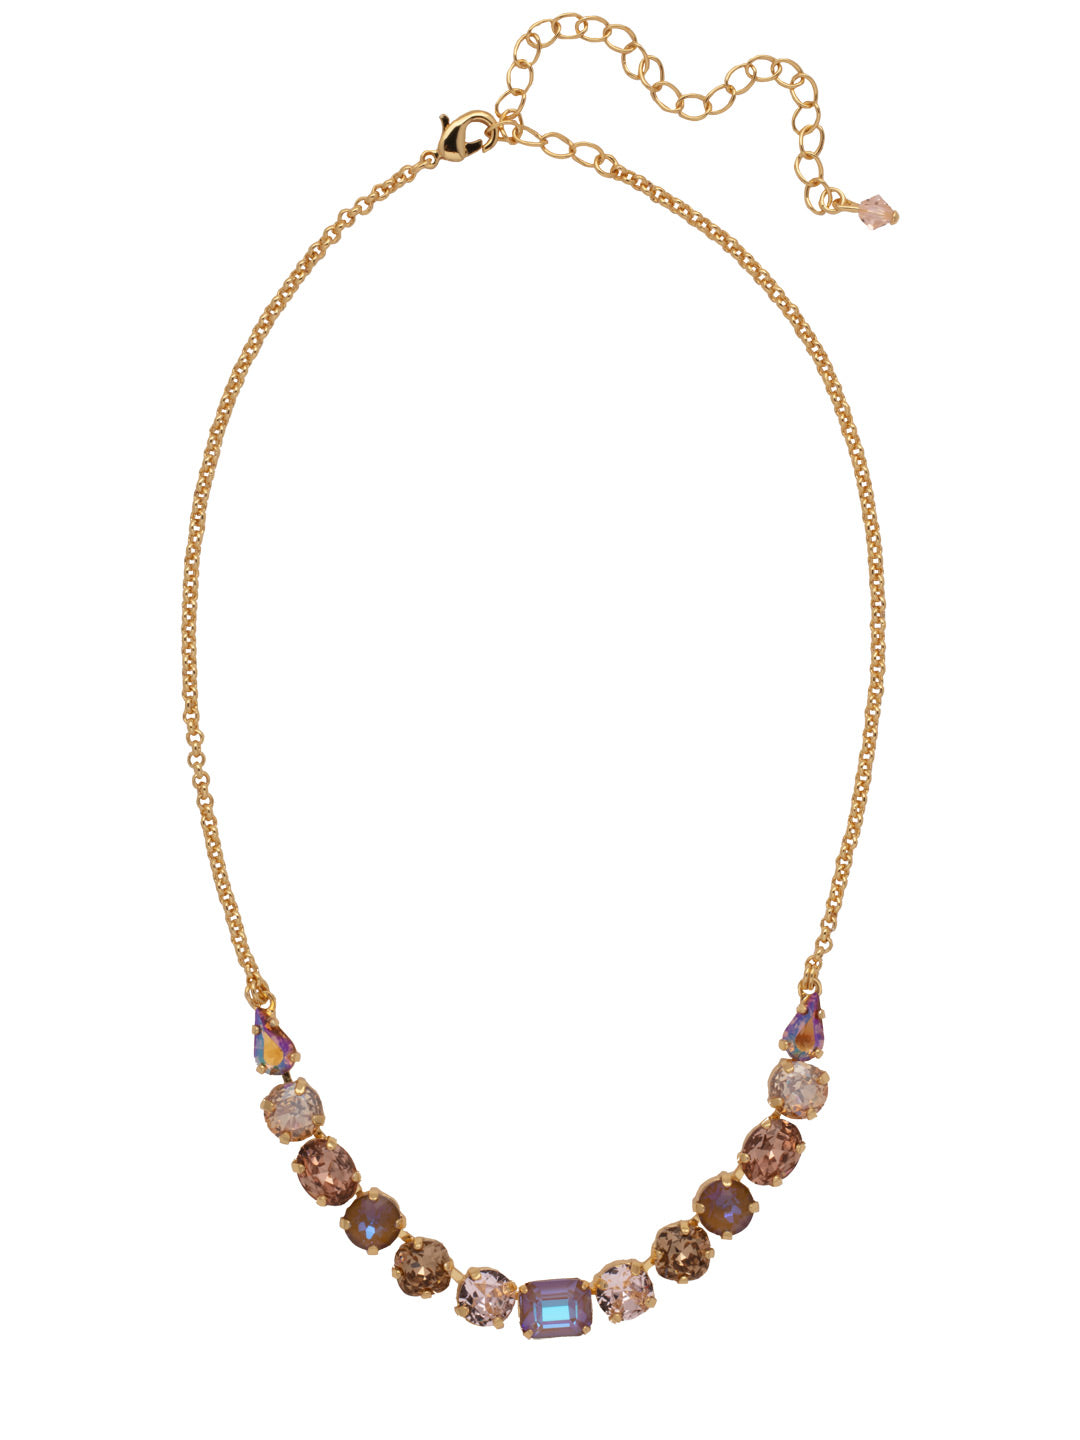 Tansy Half Line Tennis Necklace - NDQ14BGRSU - <p>Oval, round, emerald, pear and cushion cut crystals are accented by a delicate chain for subtle sparkle that looks great layered or worn solo. From Sorrelli's Raw Sugar collection in our Bright Gold-tone finish.</p>